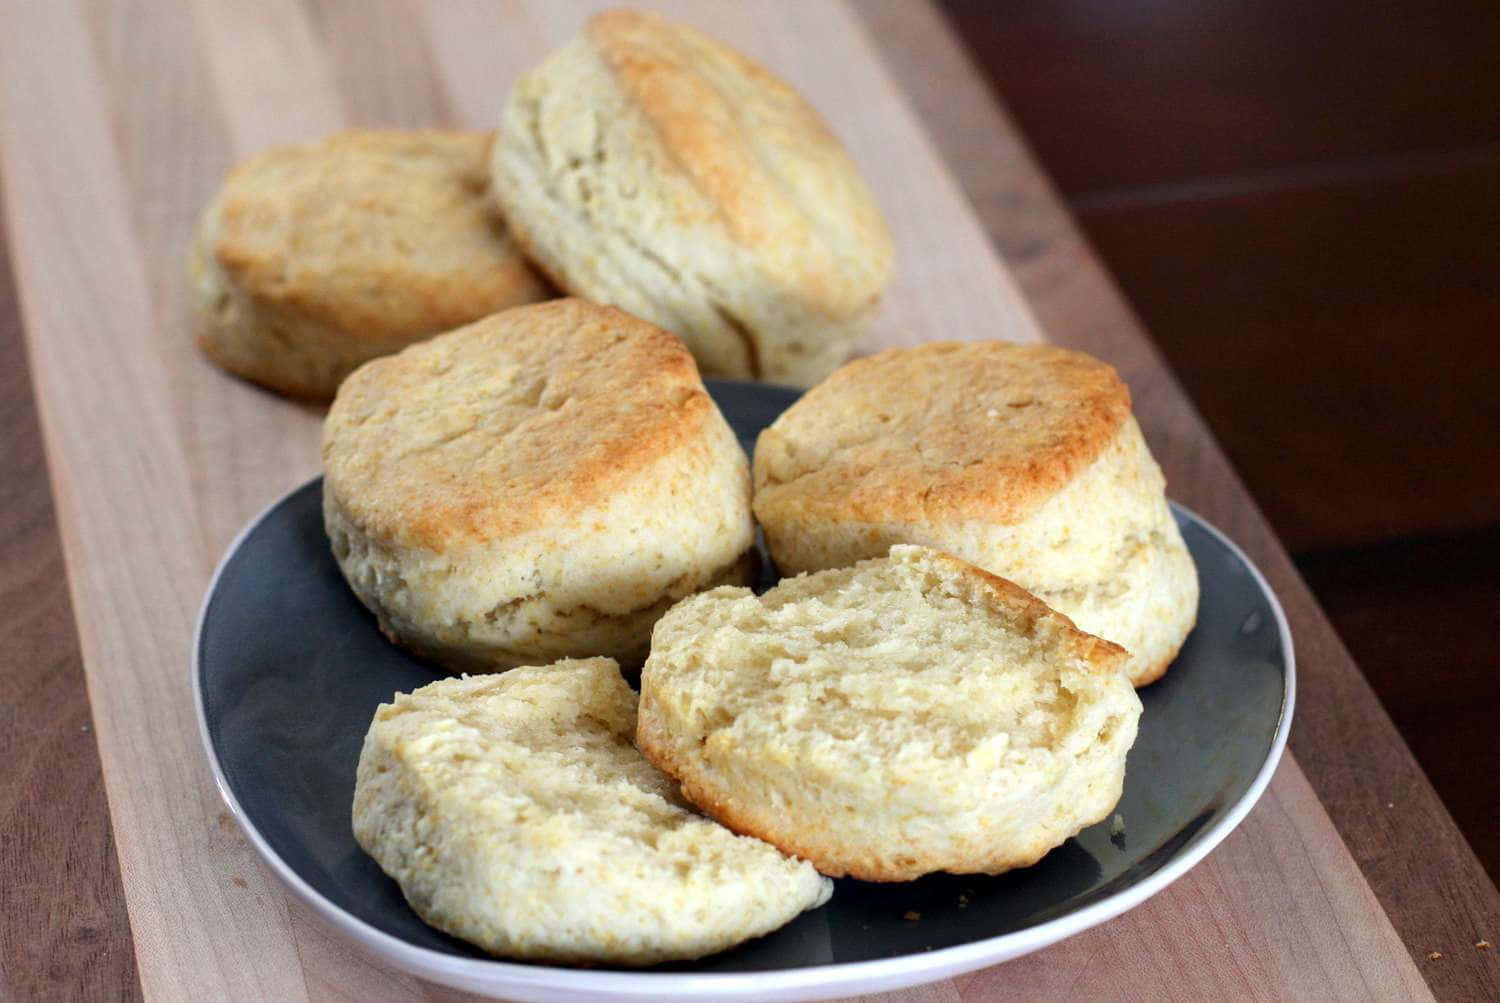 Satisfy your sweet tooth with these delicious biscuits!